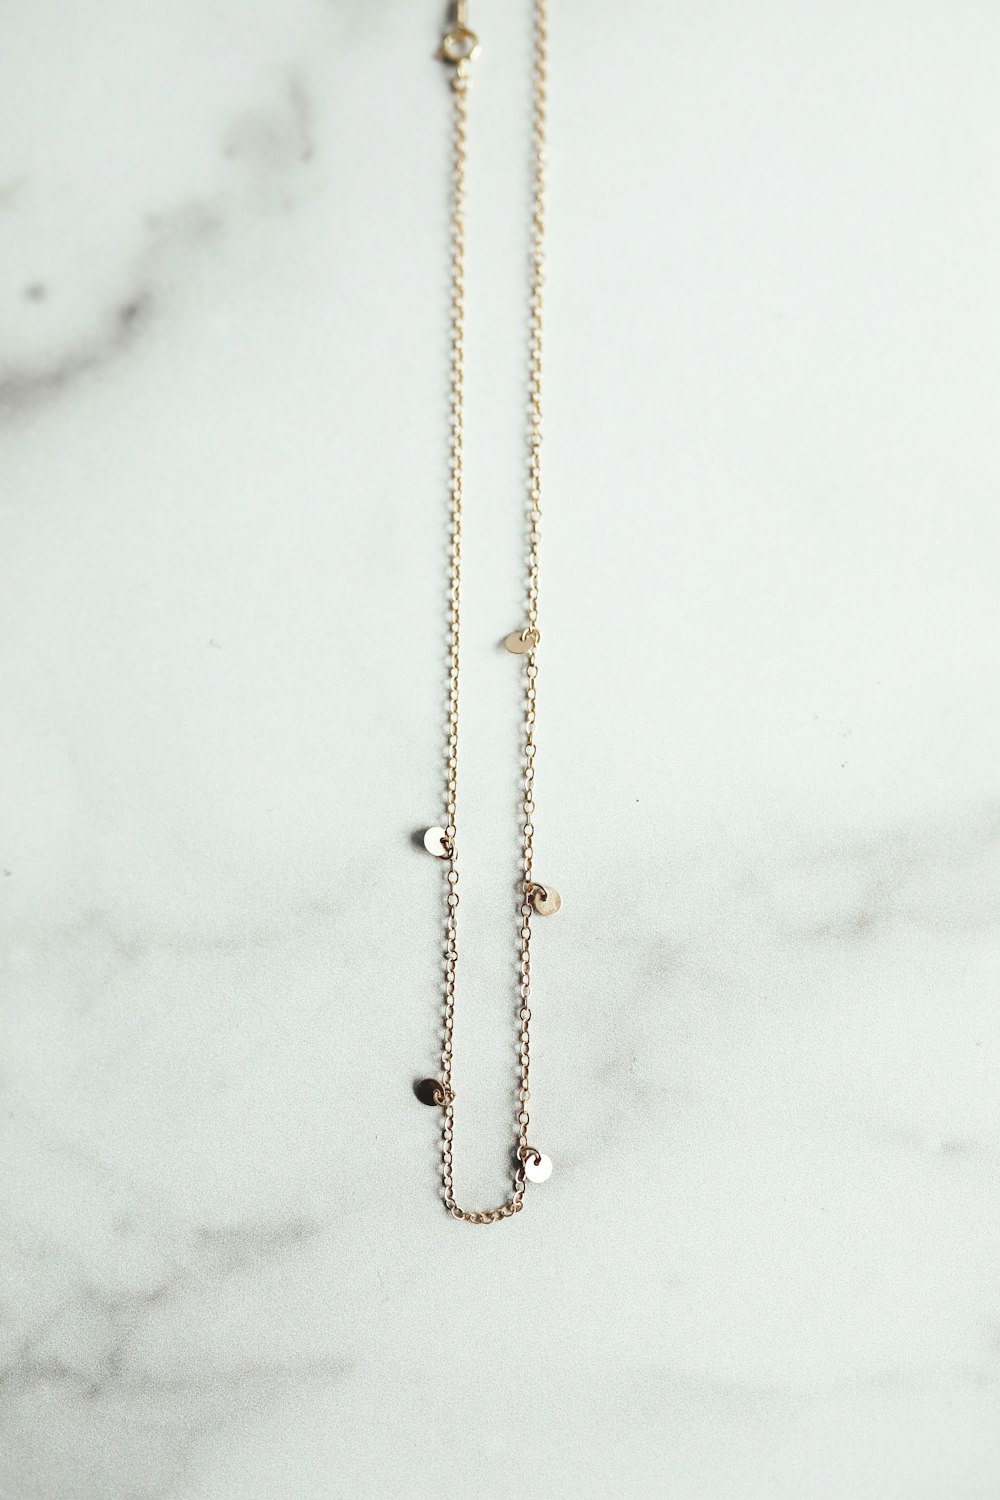 gold chain on white snow